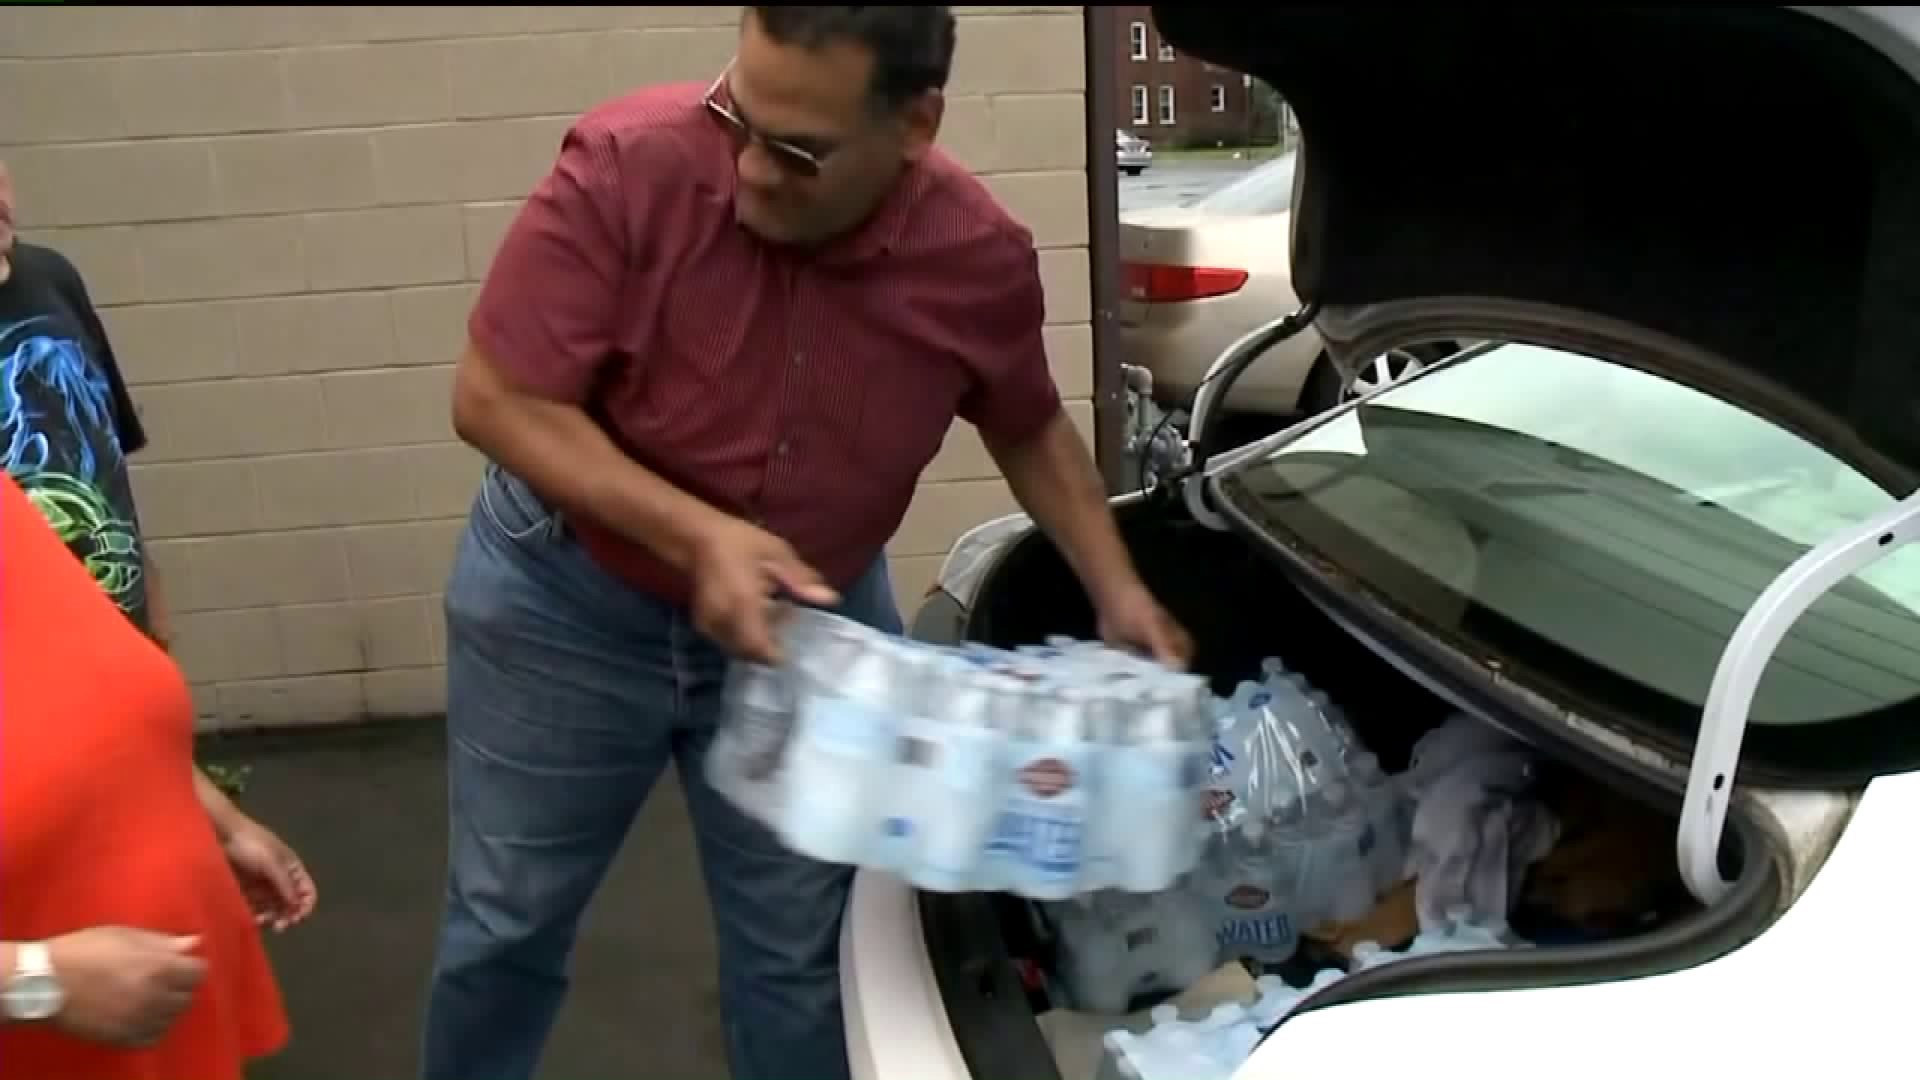 Cases of Water Donated to Homeless Resource Center in East Stroudsburg